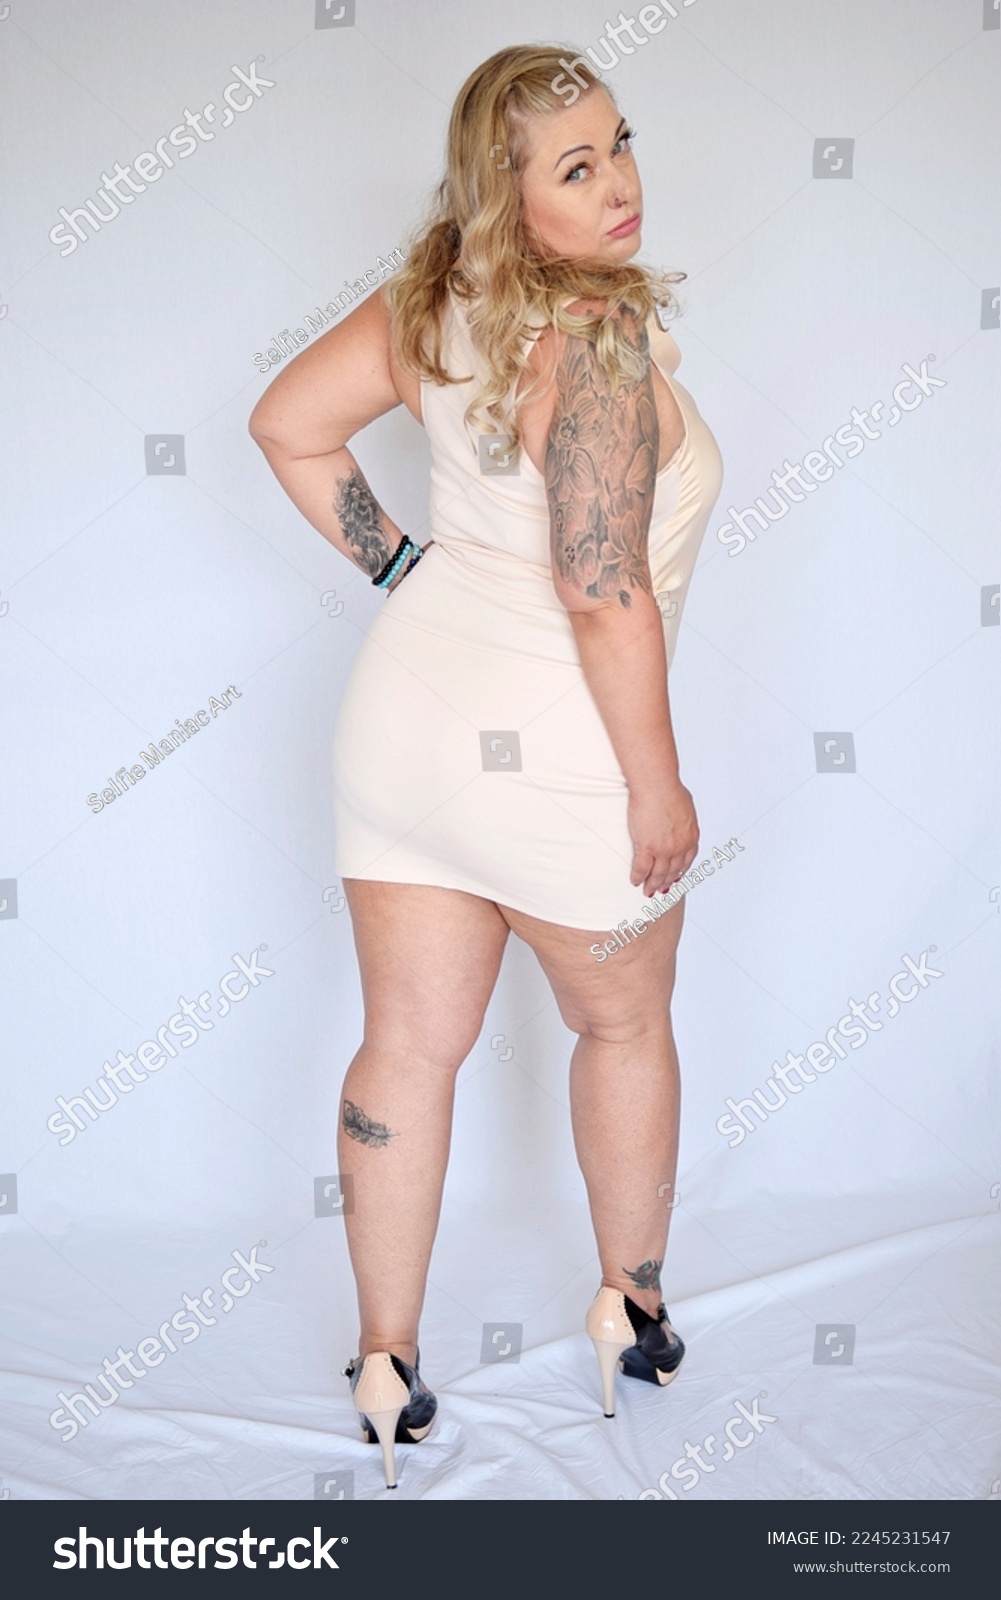 ashley tameling share chubby girls in high heels photos